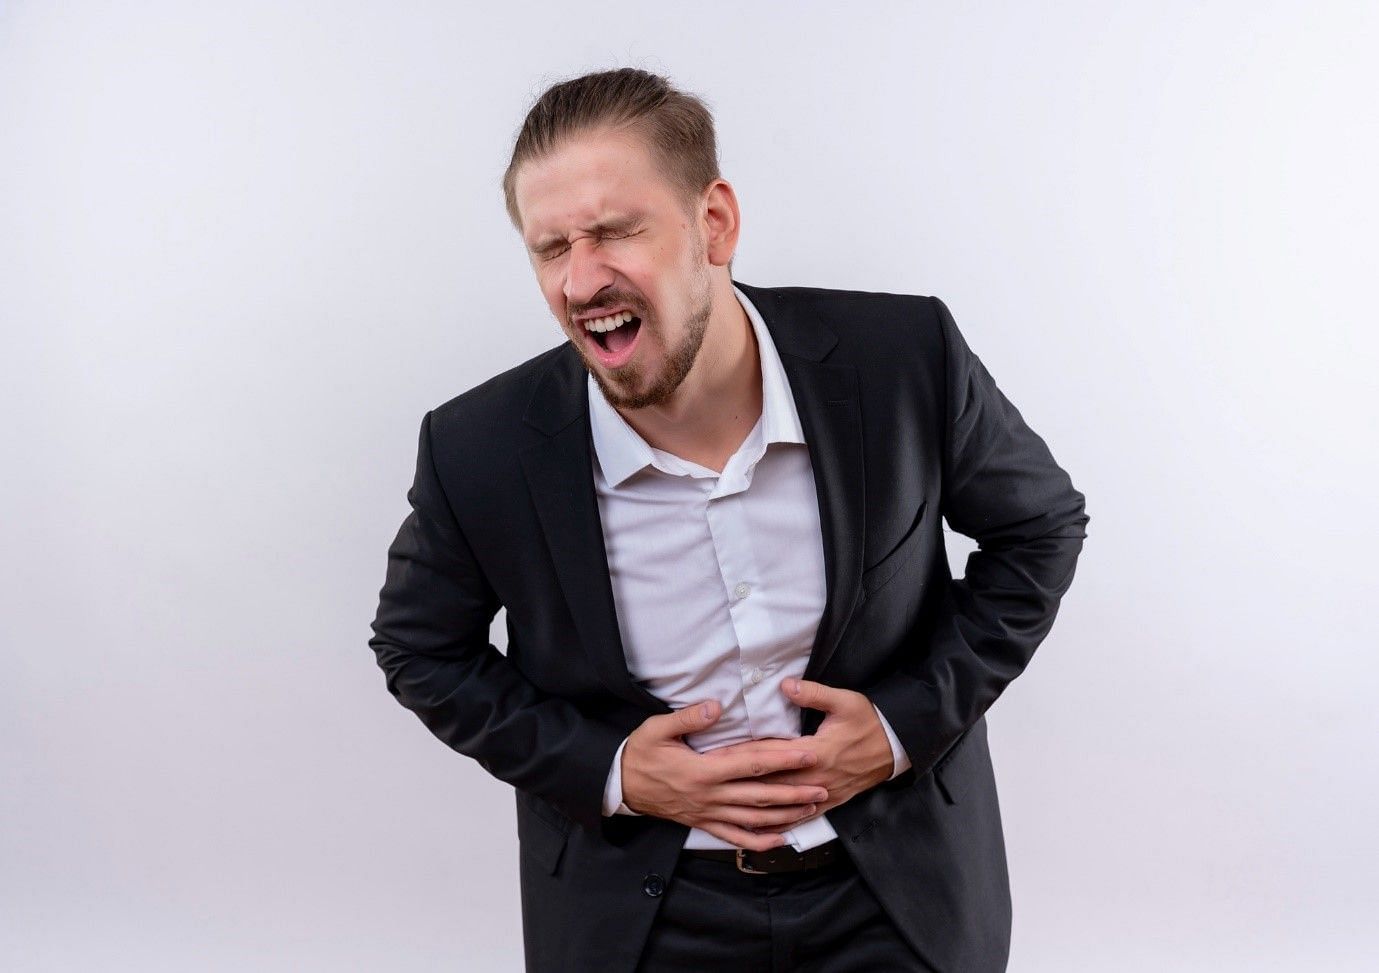 Can constipation cause nausea if toxins build up in your body? (Image by Stockking on Freepik)